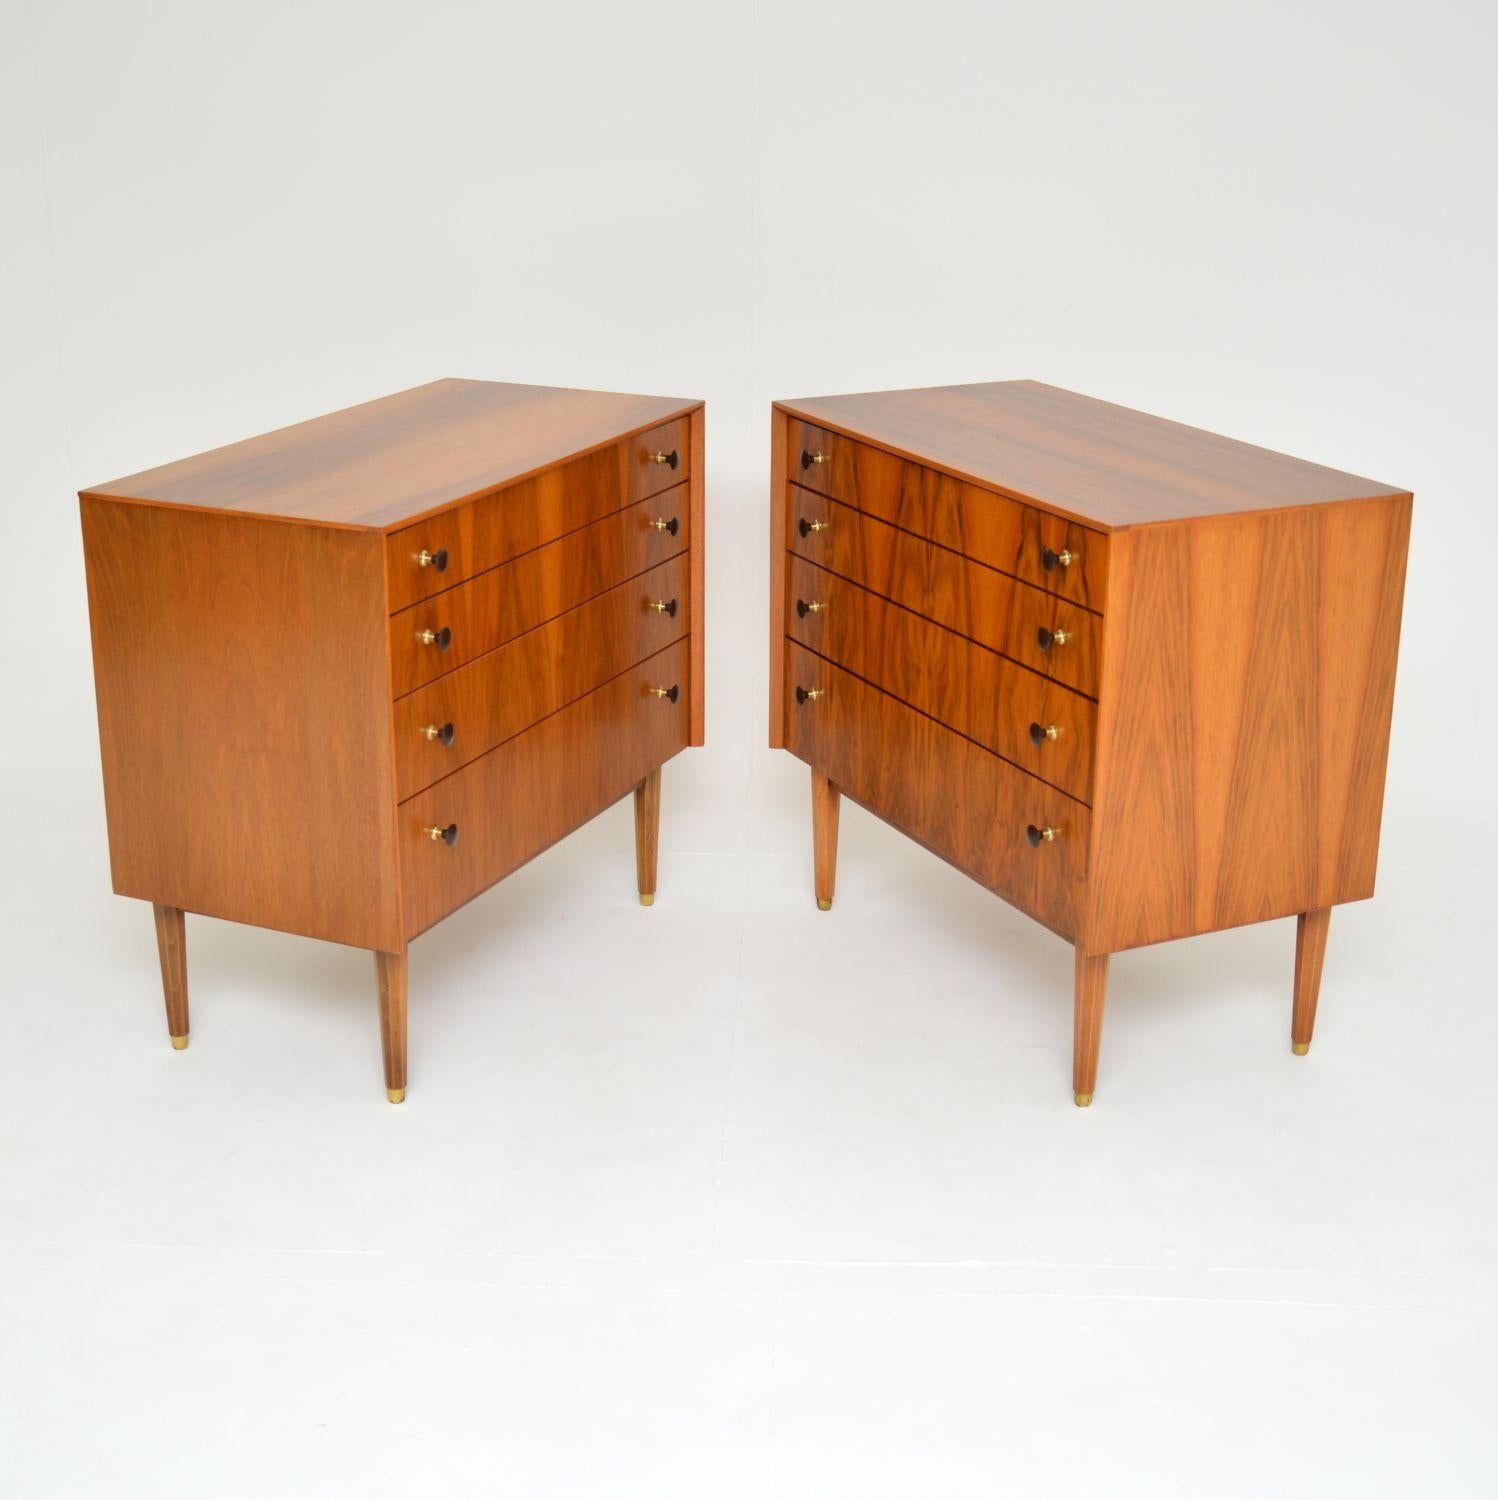 British 1960s Pair of Walnut Chests of Drawers by G Plan